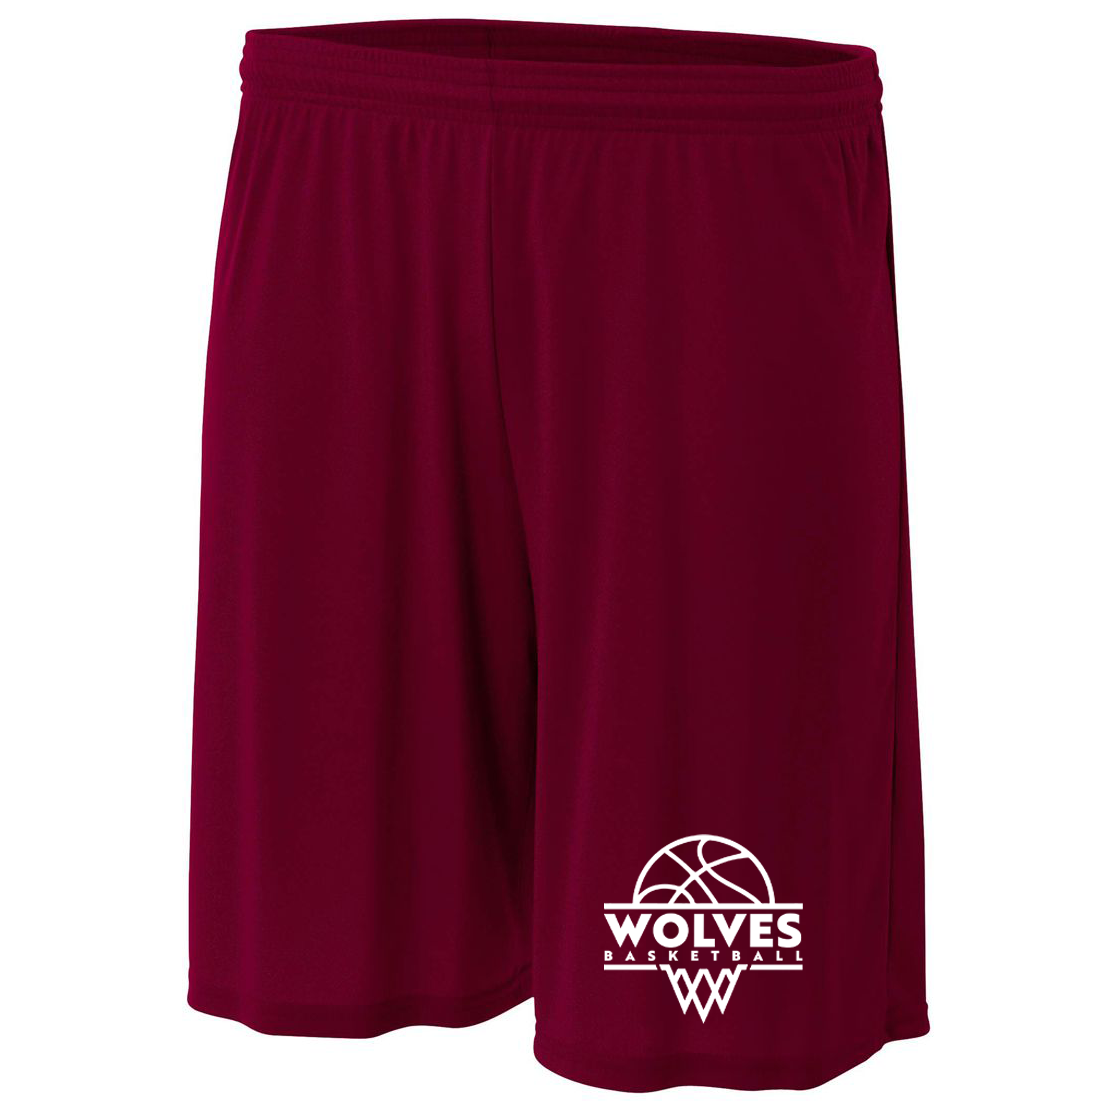 Wolves Basketball Cooling 7" Performance Shorts